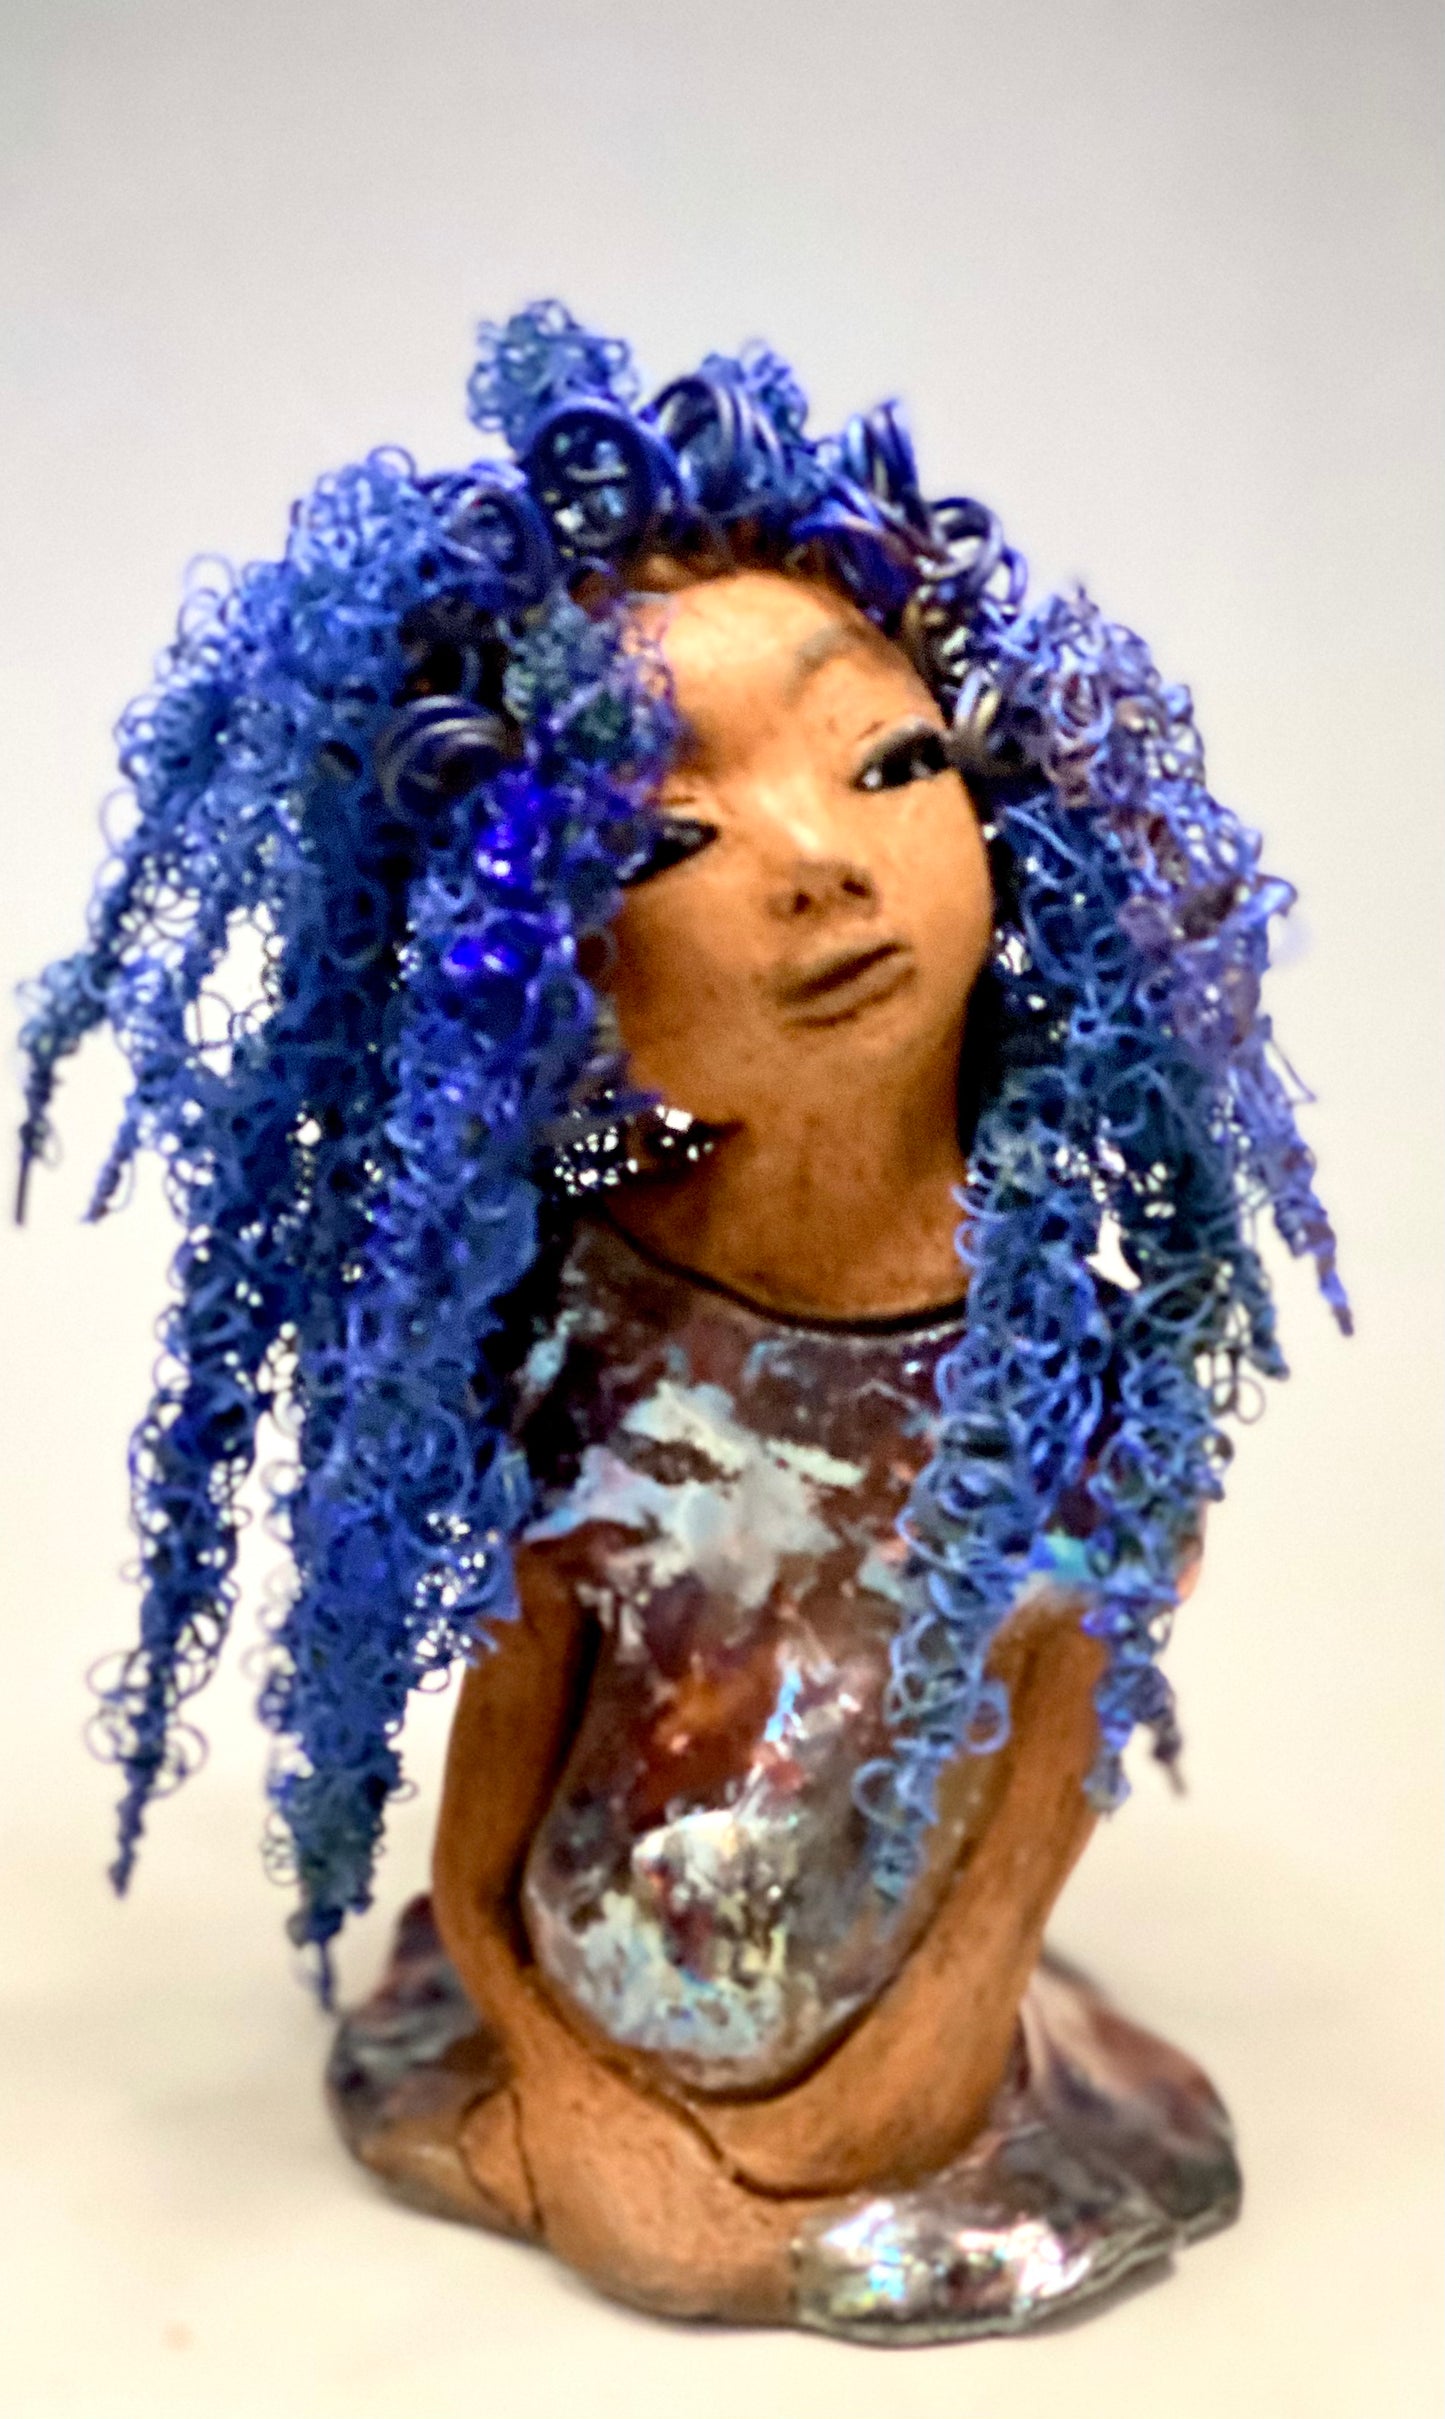 Rachel Rachel stands 8" x 6" x 5.5" and weighs 1.9 lbs. She has a lovely honey brown complexion with cocoa brown lips. She has long twisted wire locs hairstyle waist down!  Rachel has a very colorful metallic  copper blue antique glazed dress. She has over 75 feet of 16 and 24 gauge  wire for hair. It took over 6 hours just to do her hair! With  eyes wide opened, Rachel has hope of finding a new home.  